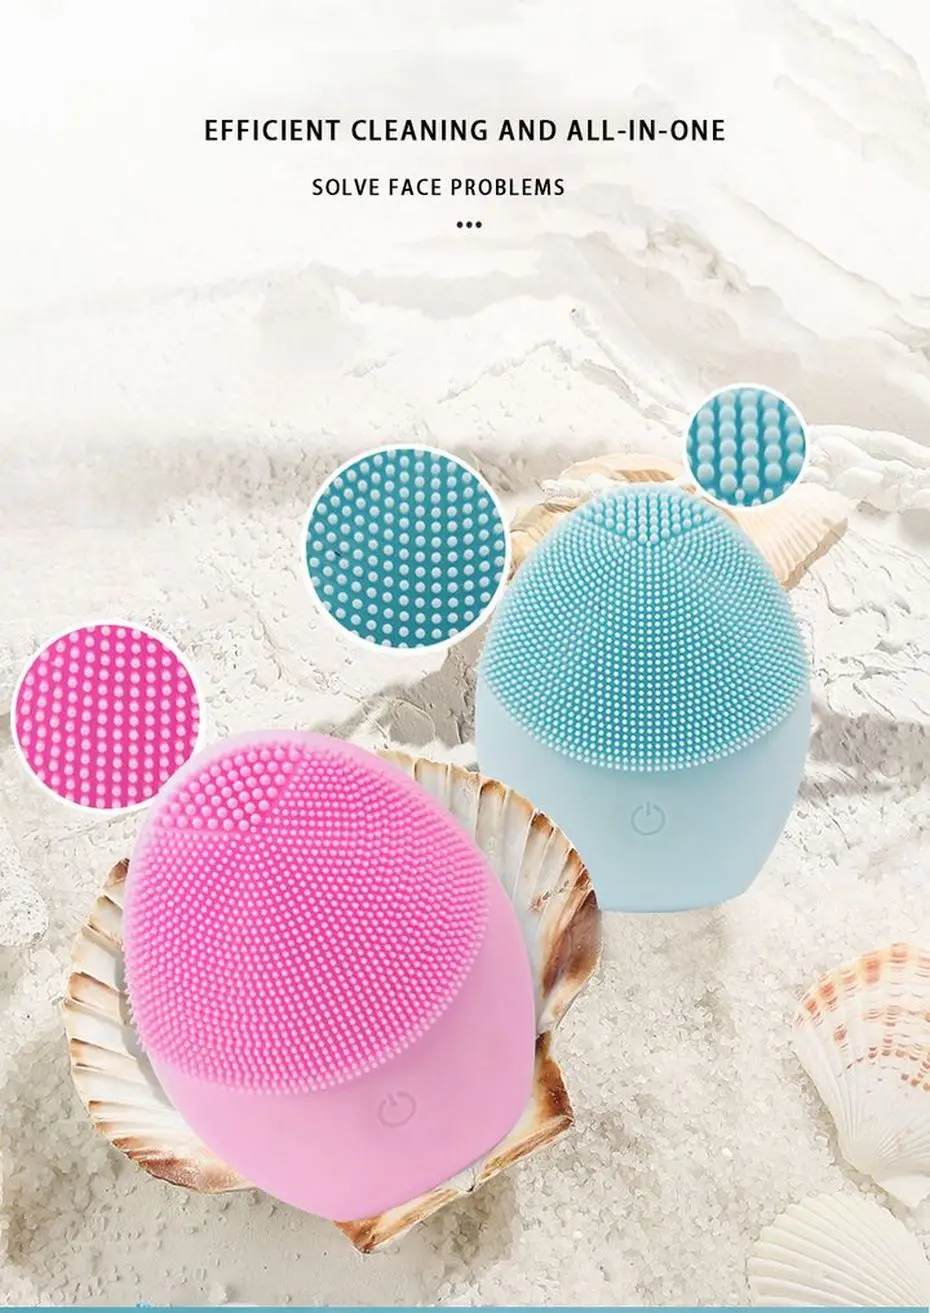 LAIKOU Silicone Electric Face Cleanser Face Cleansing Brush Electric Facial Cleanser Cleansing Skin Deep Washing Massage Brush